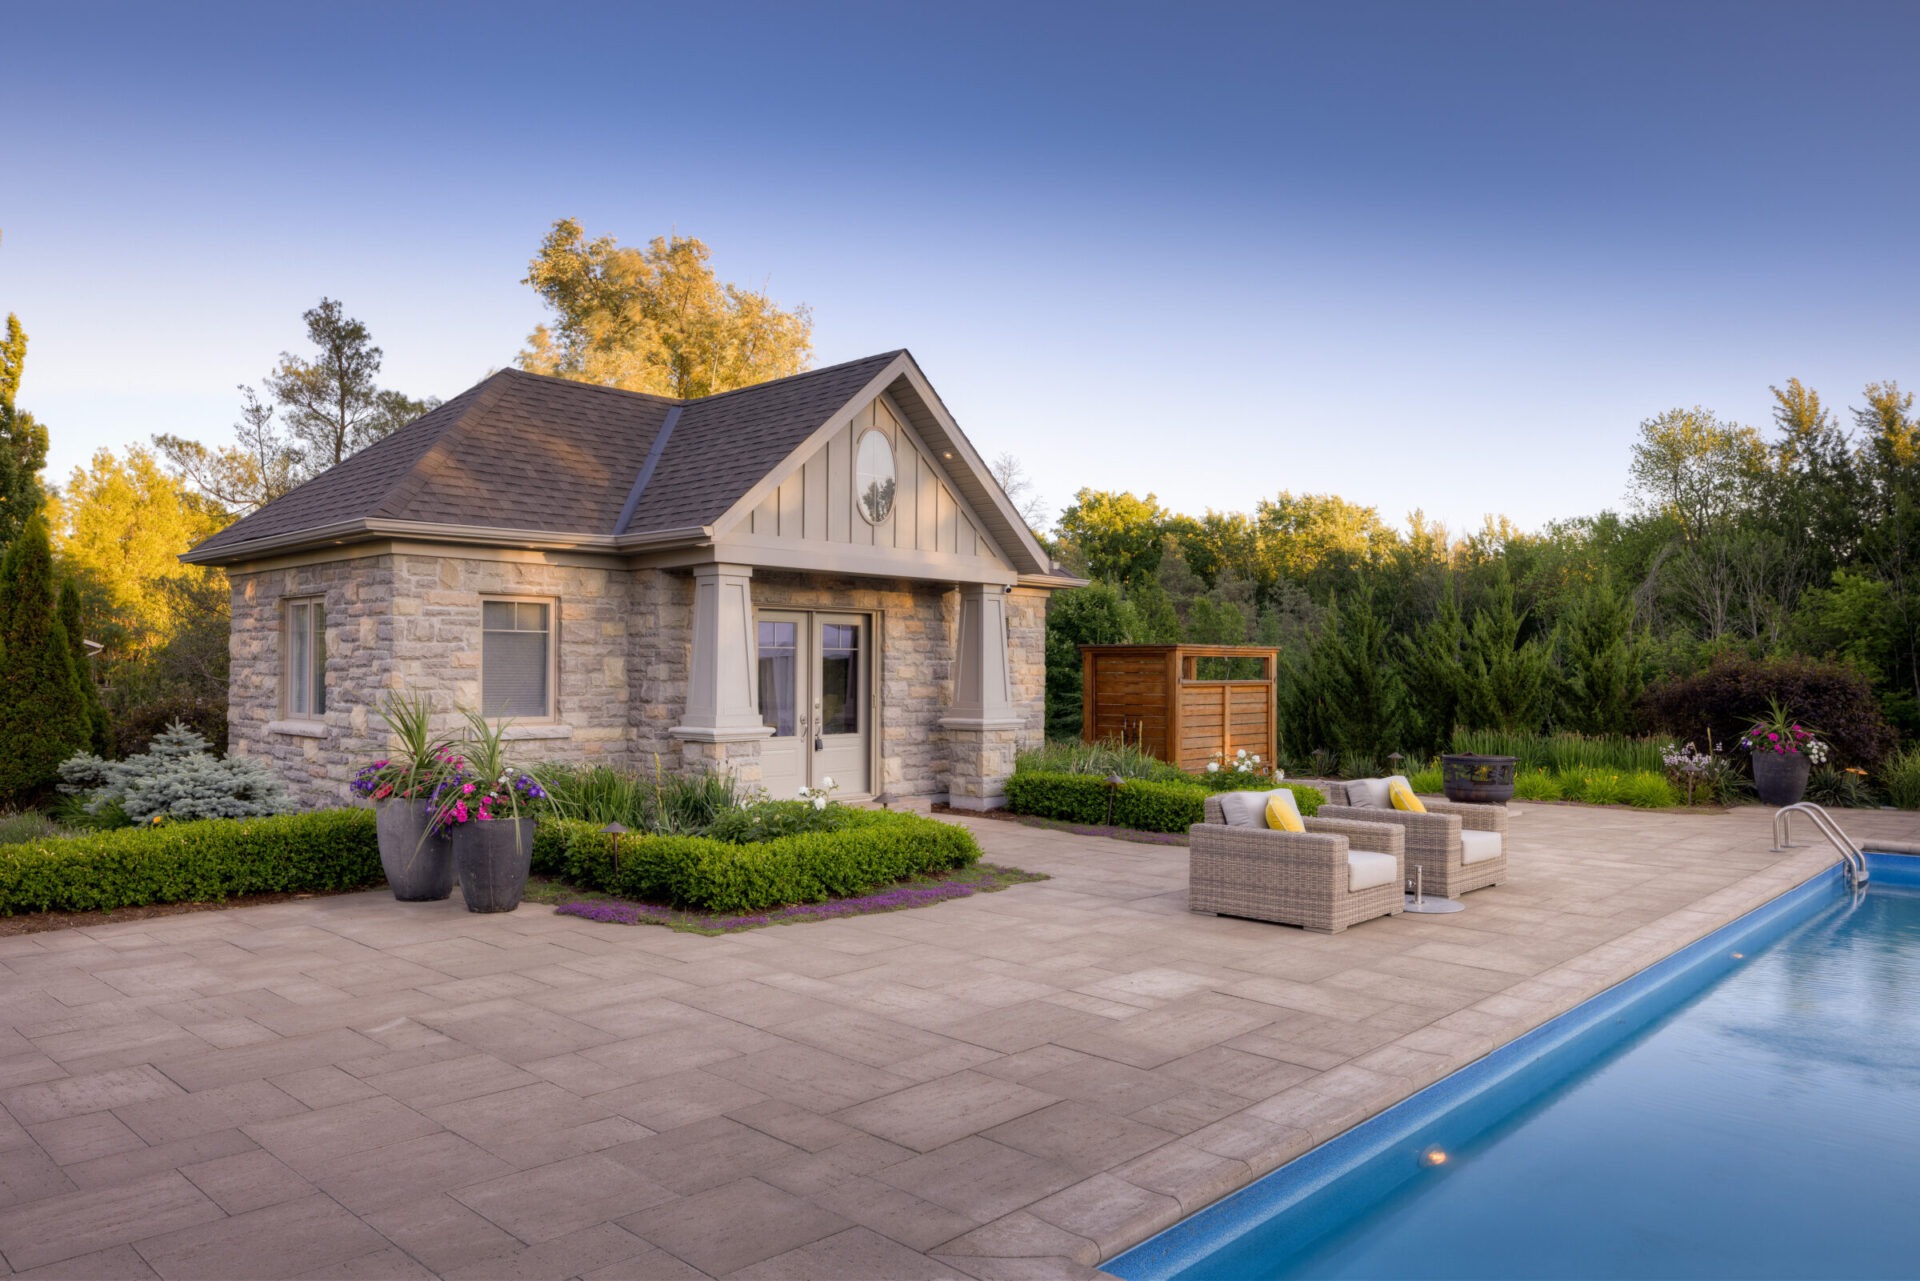 This is an image of a single-story stone house with a gabled roof, next to a swimming pool, outdoor furniture, and lush landscaping during twilight.